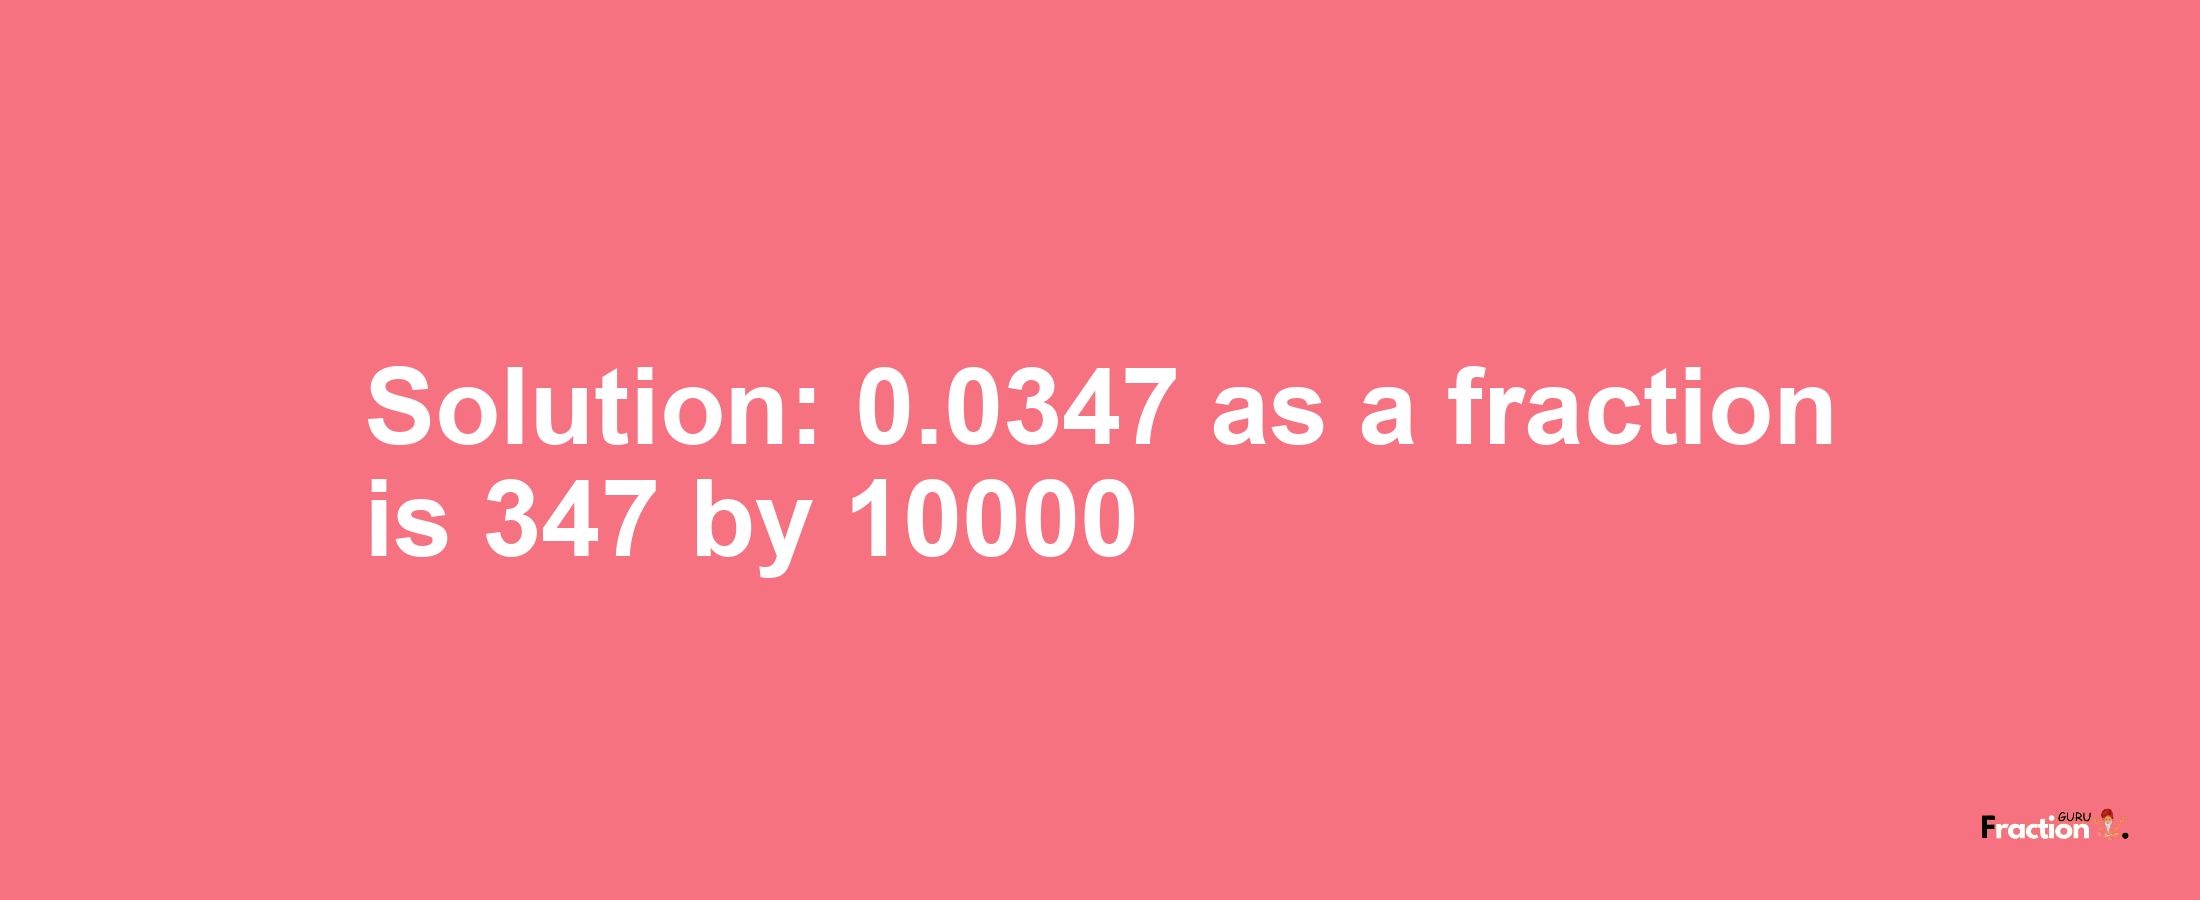 Solution:0.0347 as a fraction is 347/10000